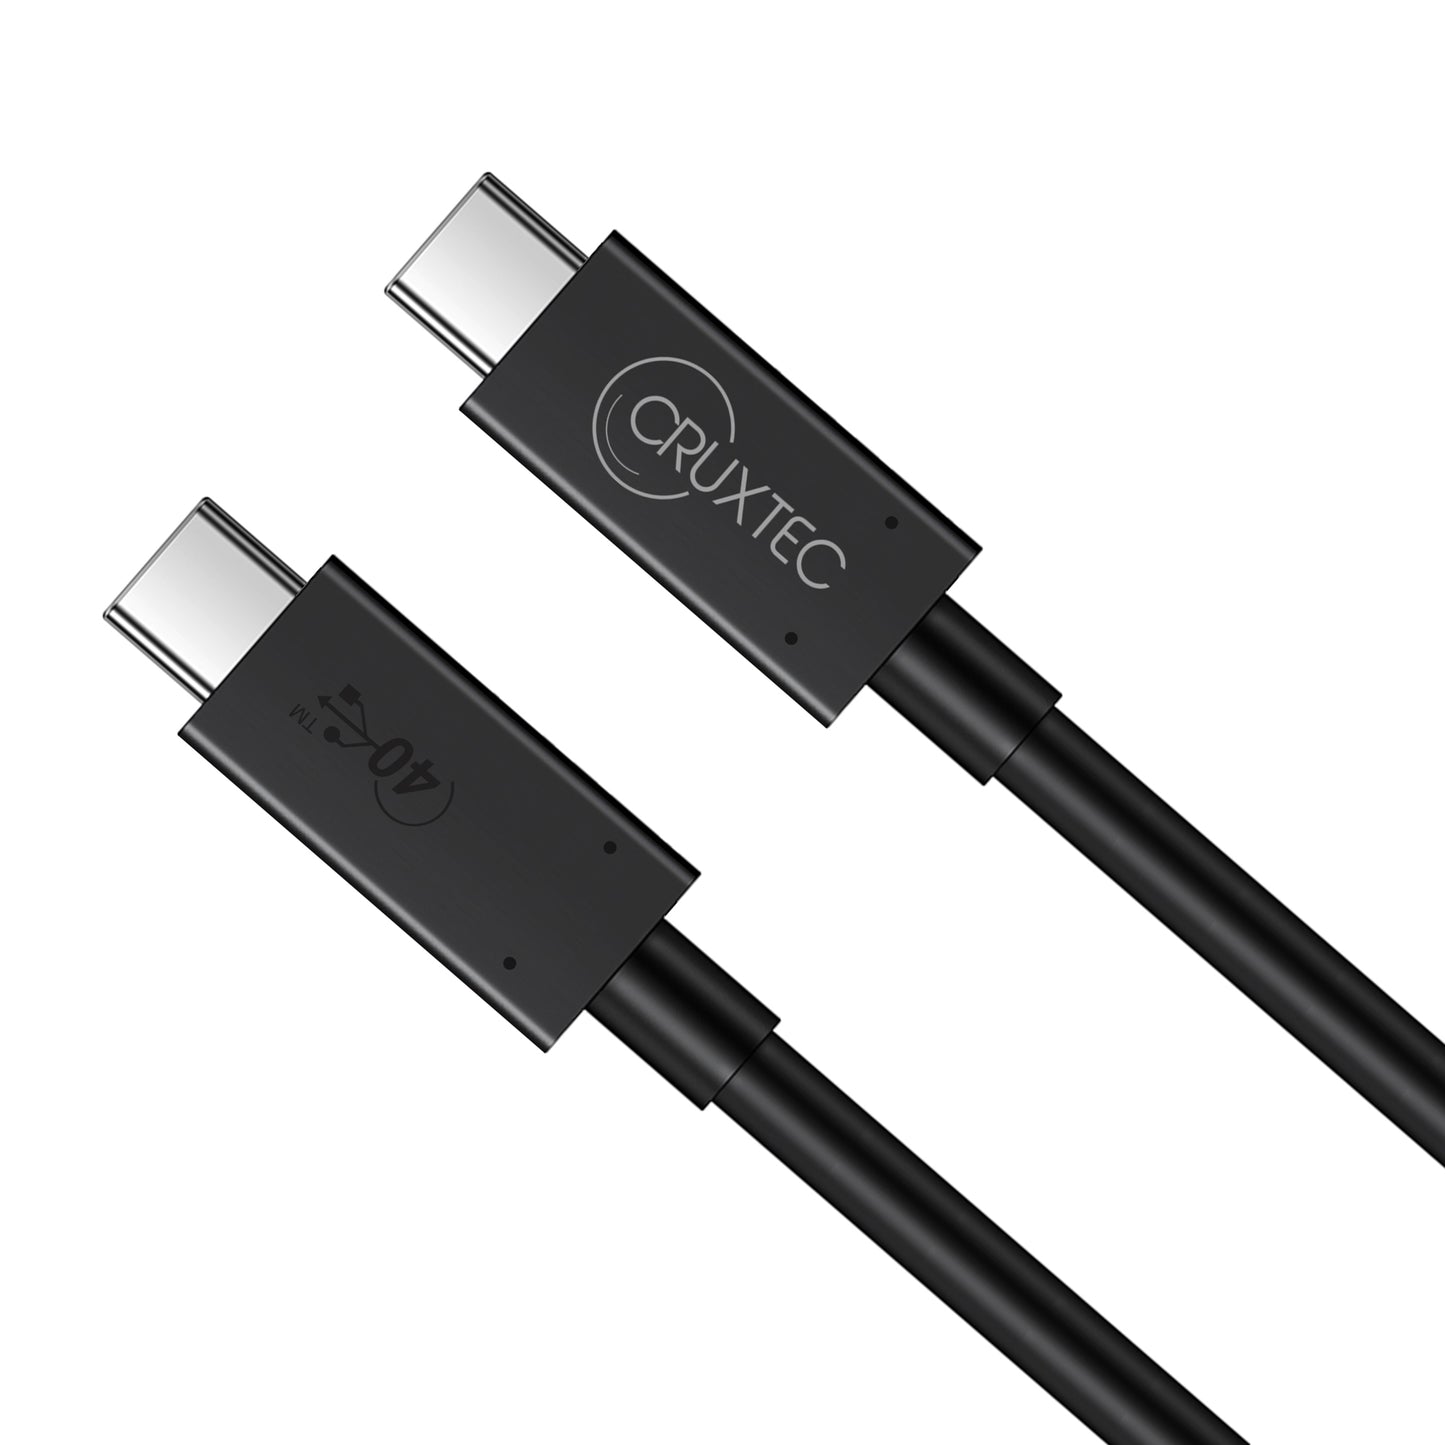 Cruxtec USB4 USB-C to USB-C Cable Full Feature for Syncing & Charging (240W, 40Gpbs, 8K@60Hz)